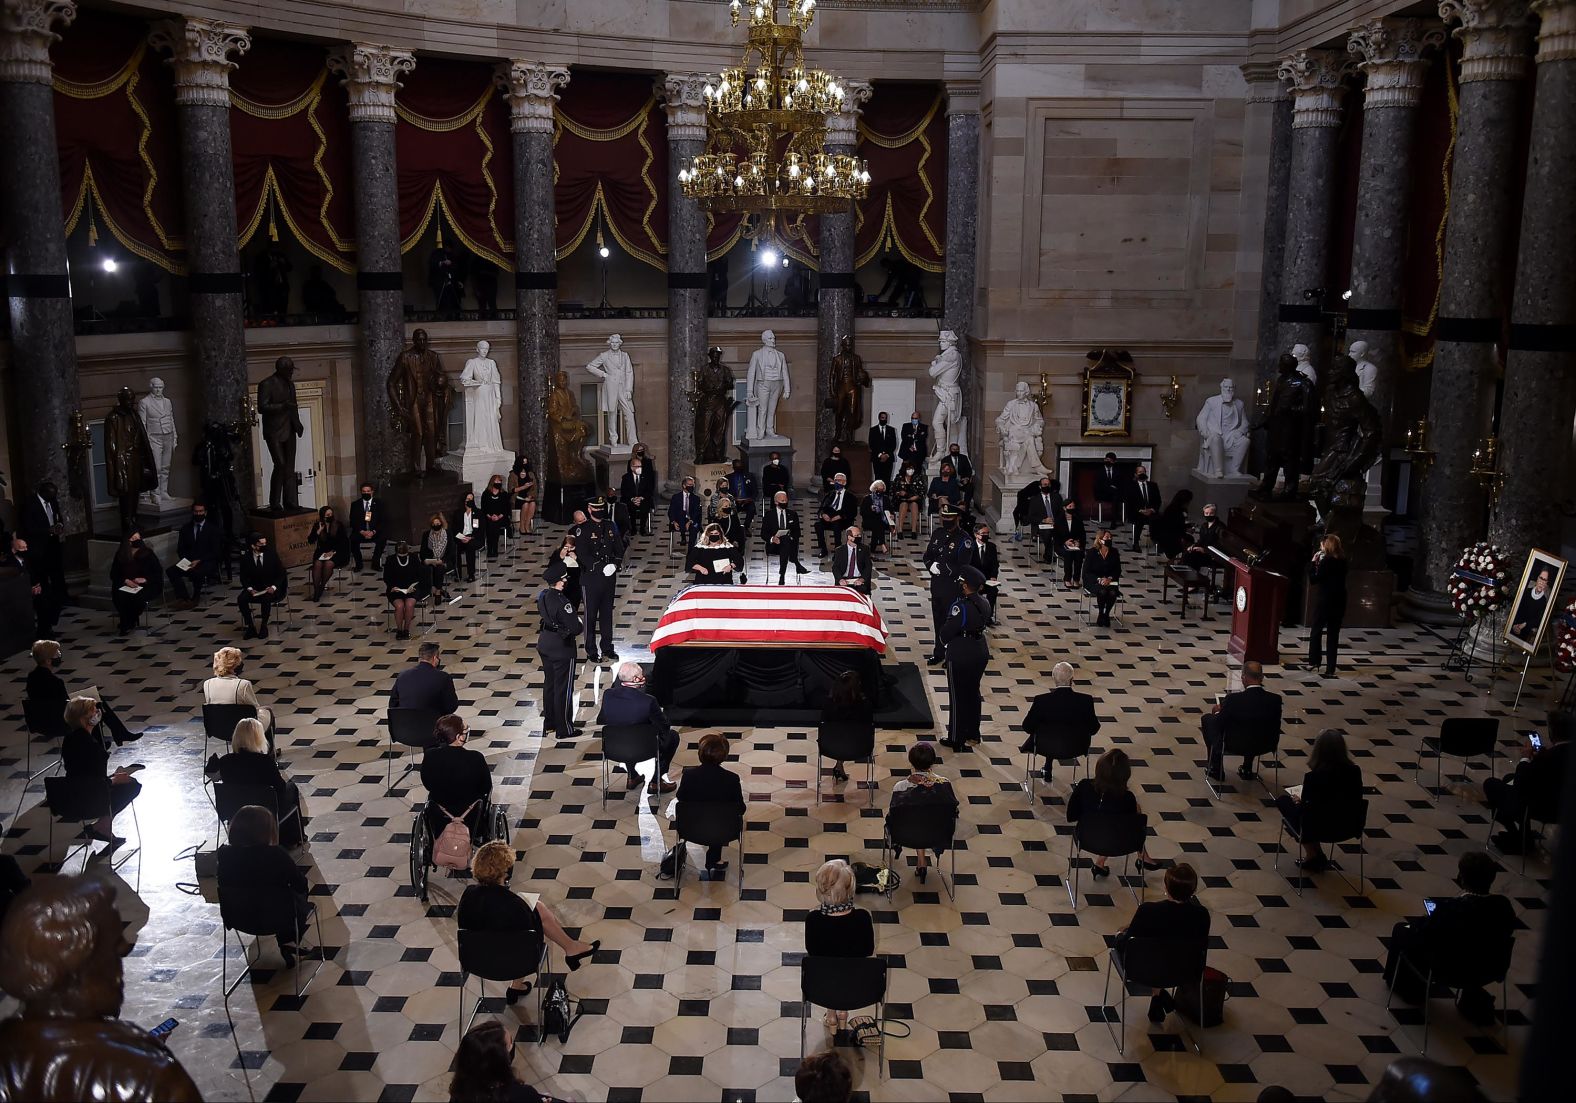 Members of Congress and guests pay their respects during a memorial service at the US Capitol on Friday.